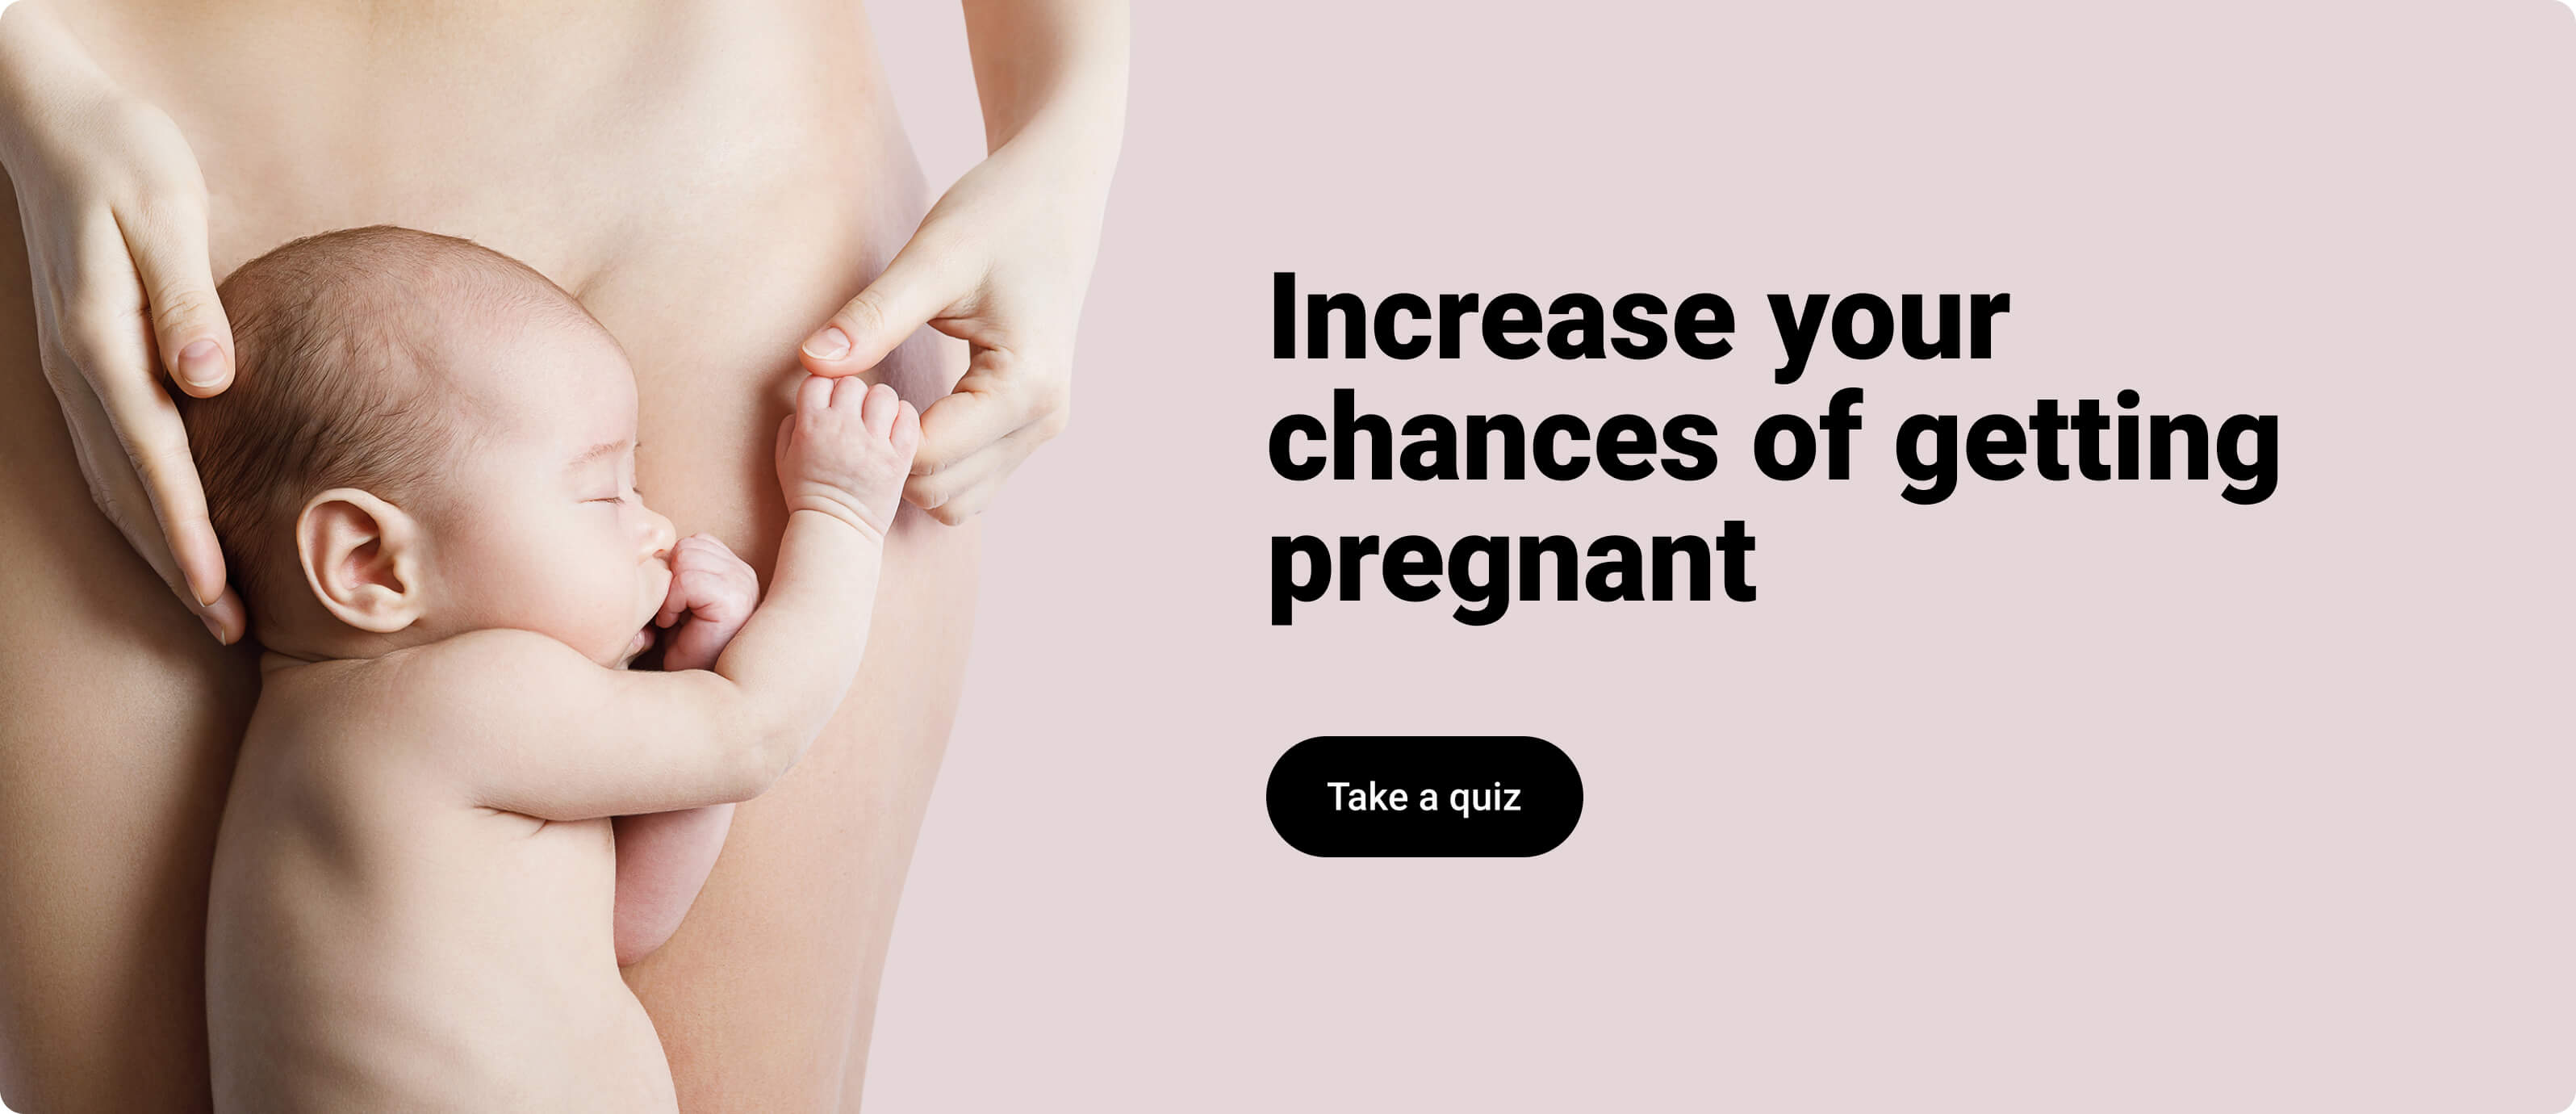 Increase your chances of getting pregnant